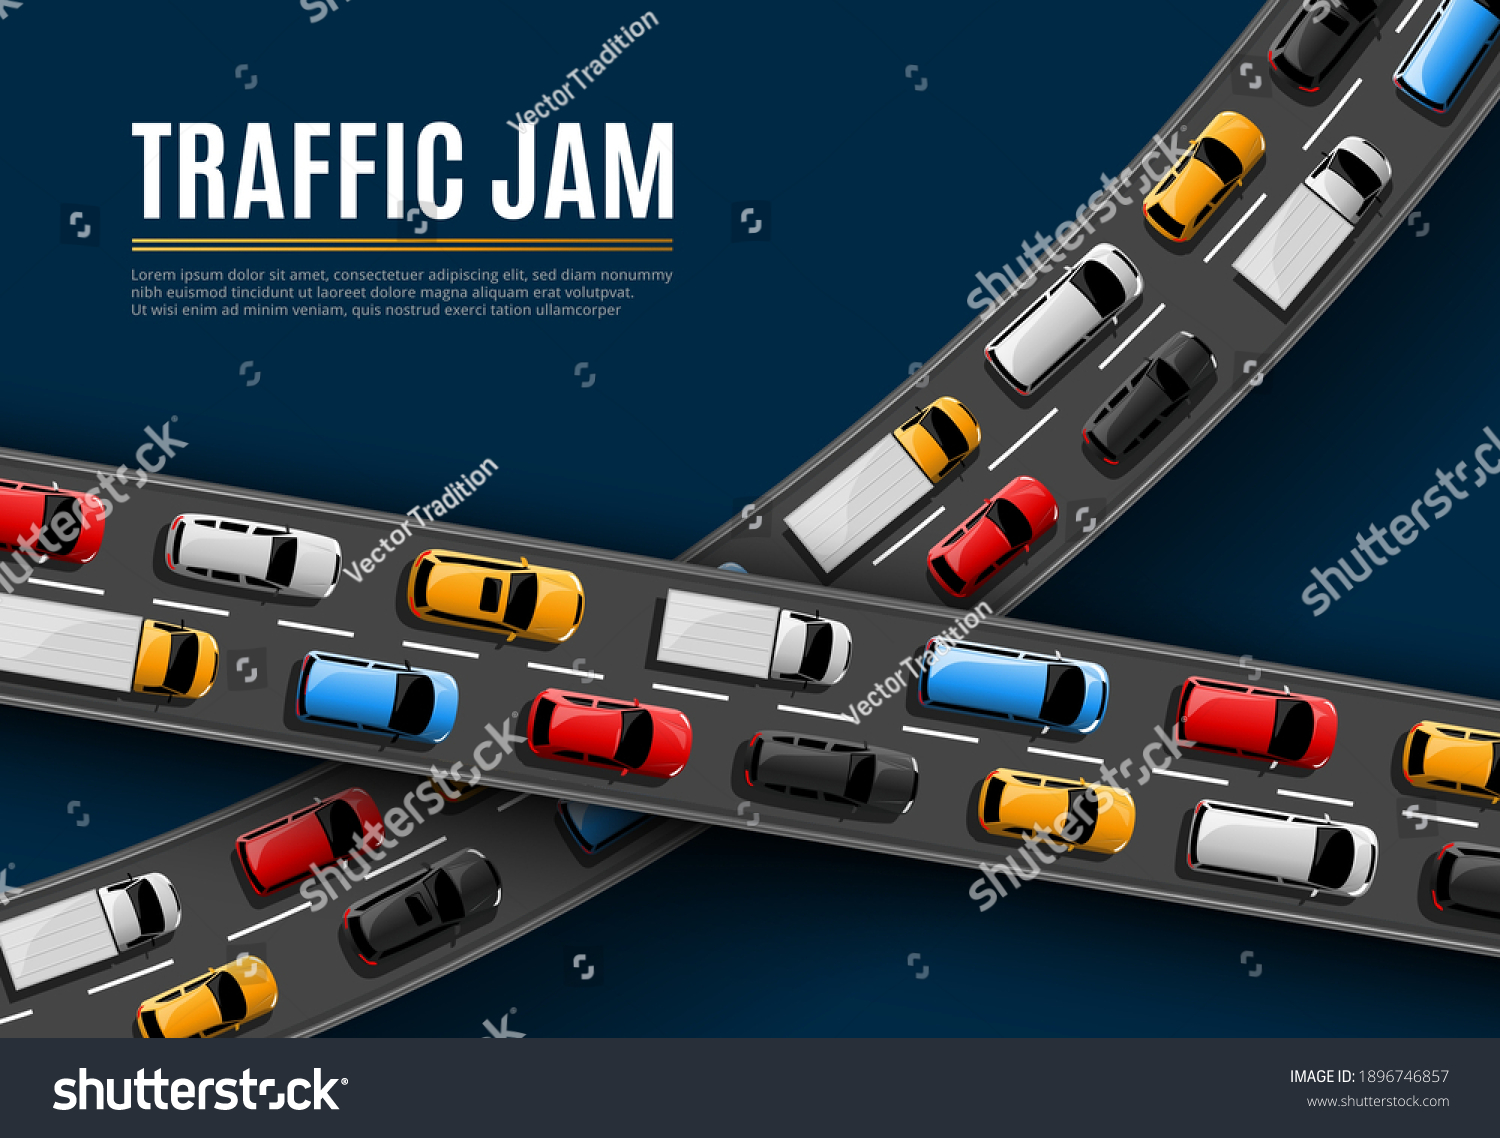 Traffic jam vector poster with cars driving on road top view. Rush hour in city, vehicles on two lane highway. Automobiles stand in rows, traffic jam problem of megalopolis, transport congestion #1896746857